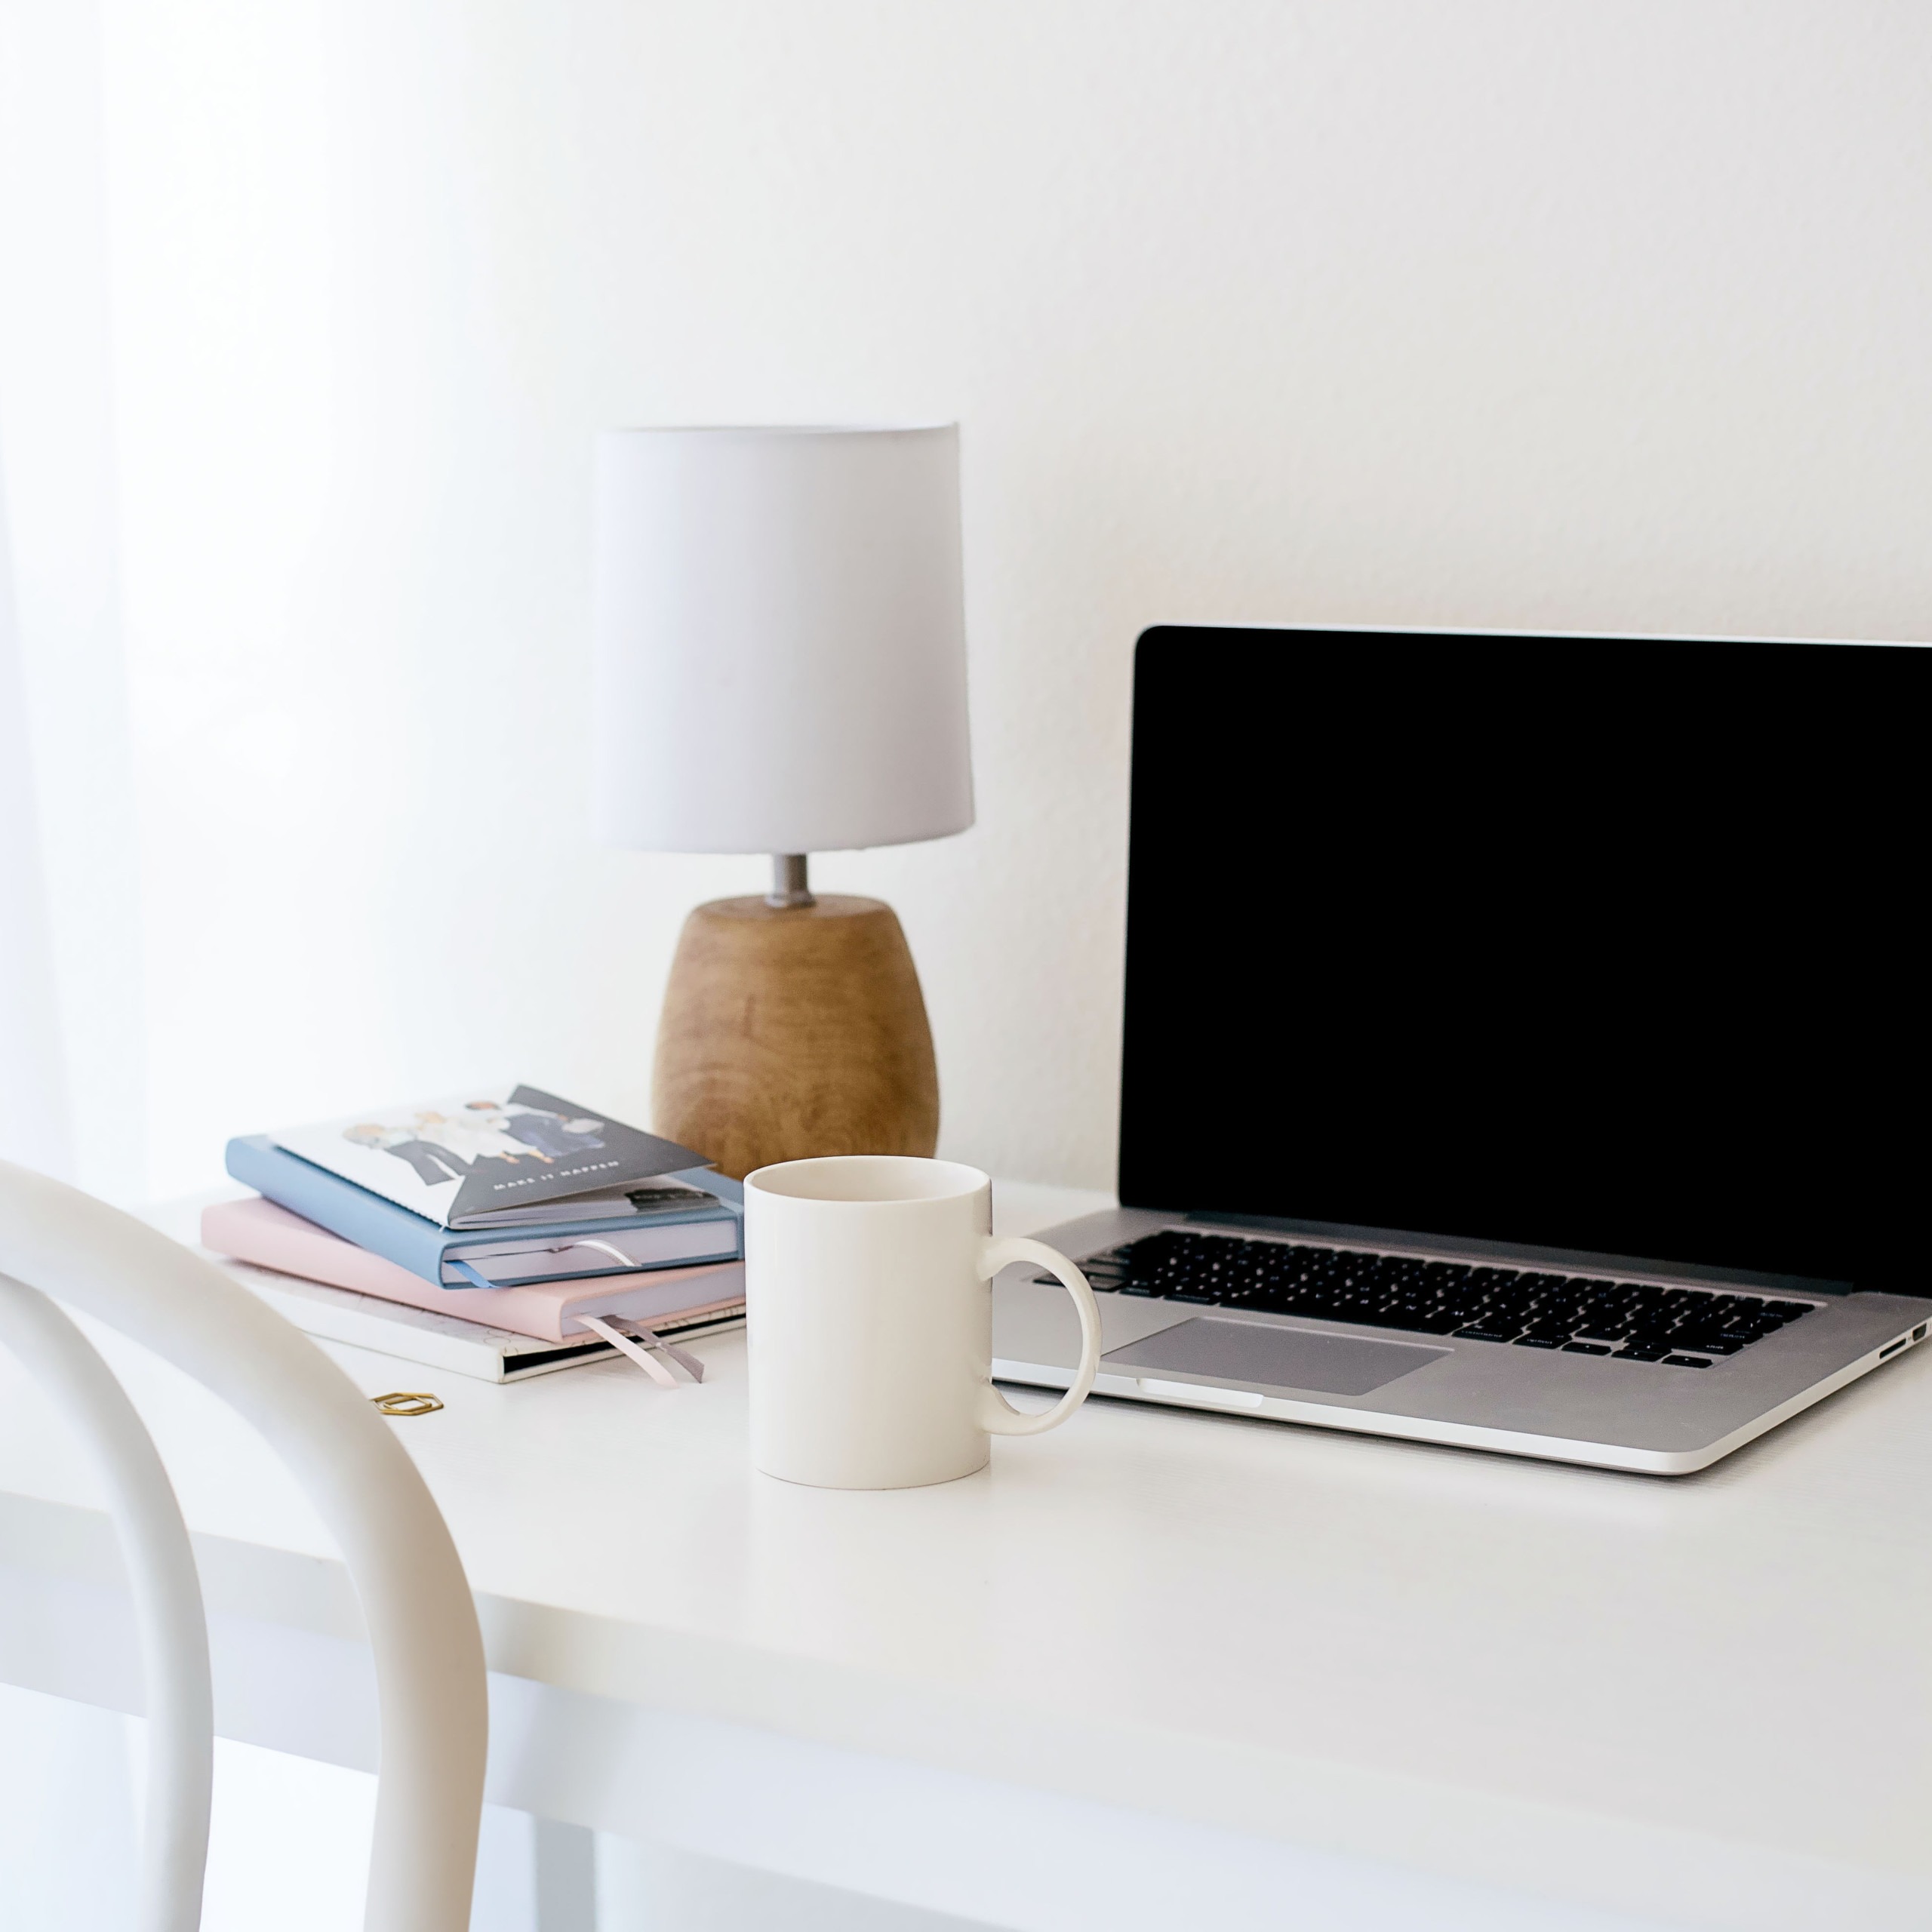 Laptop and coffee mug at minimalist work from home desk